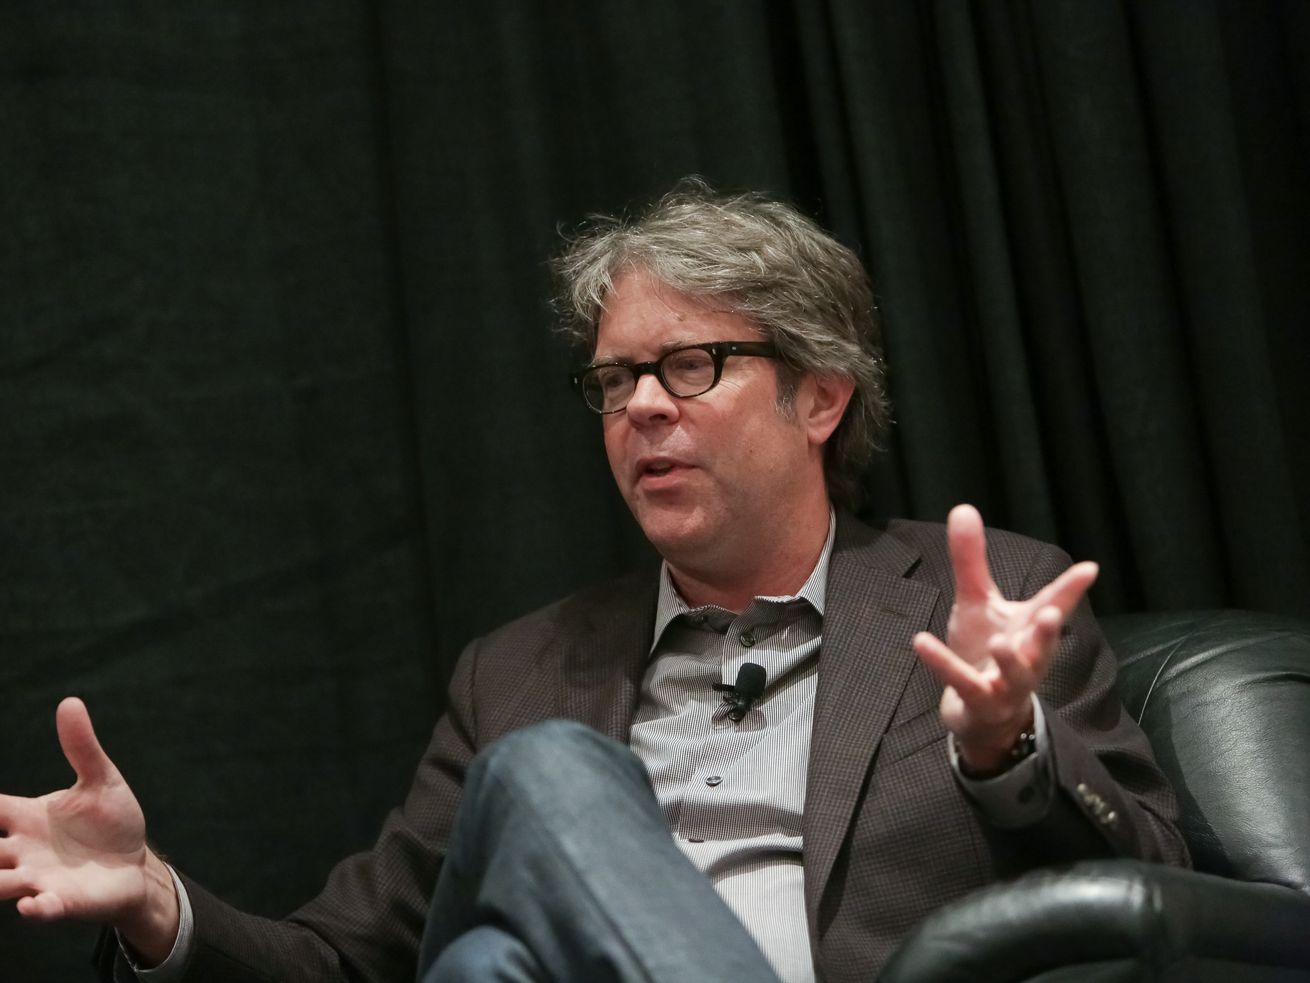 A brief history of the internet hating Jonathan Franzen